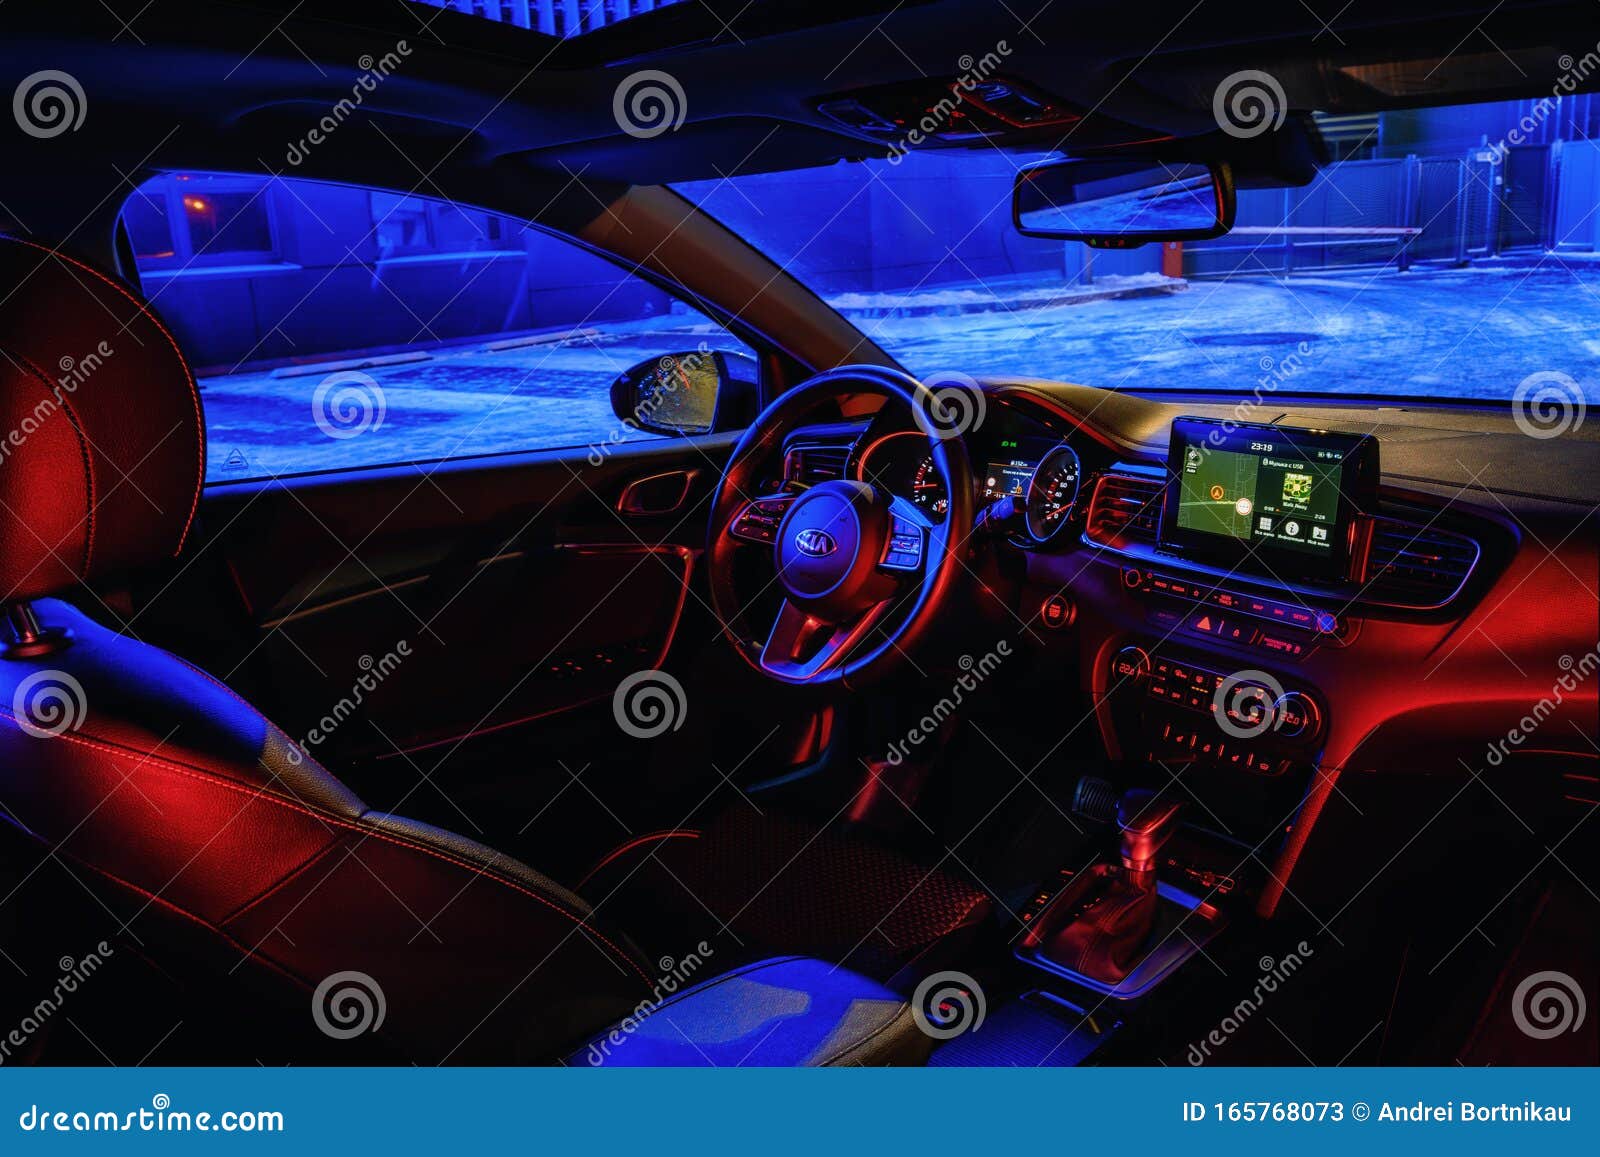 Abrasive Search Probably Interior of Kia Ceed 2018 Car on in Night City with Neon Color Lights  Editorial Stock Photo - Image of fast, display: 165768073